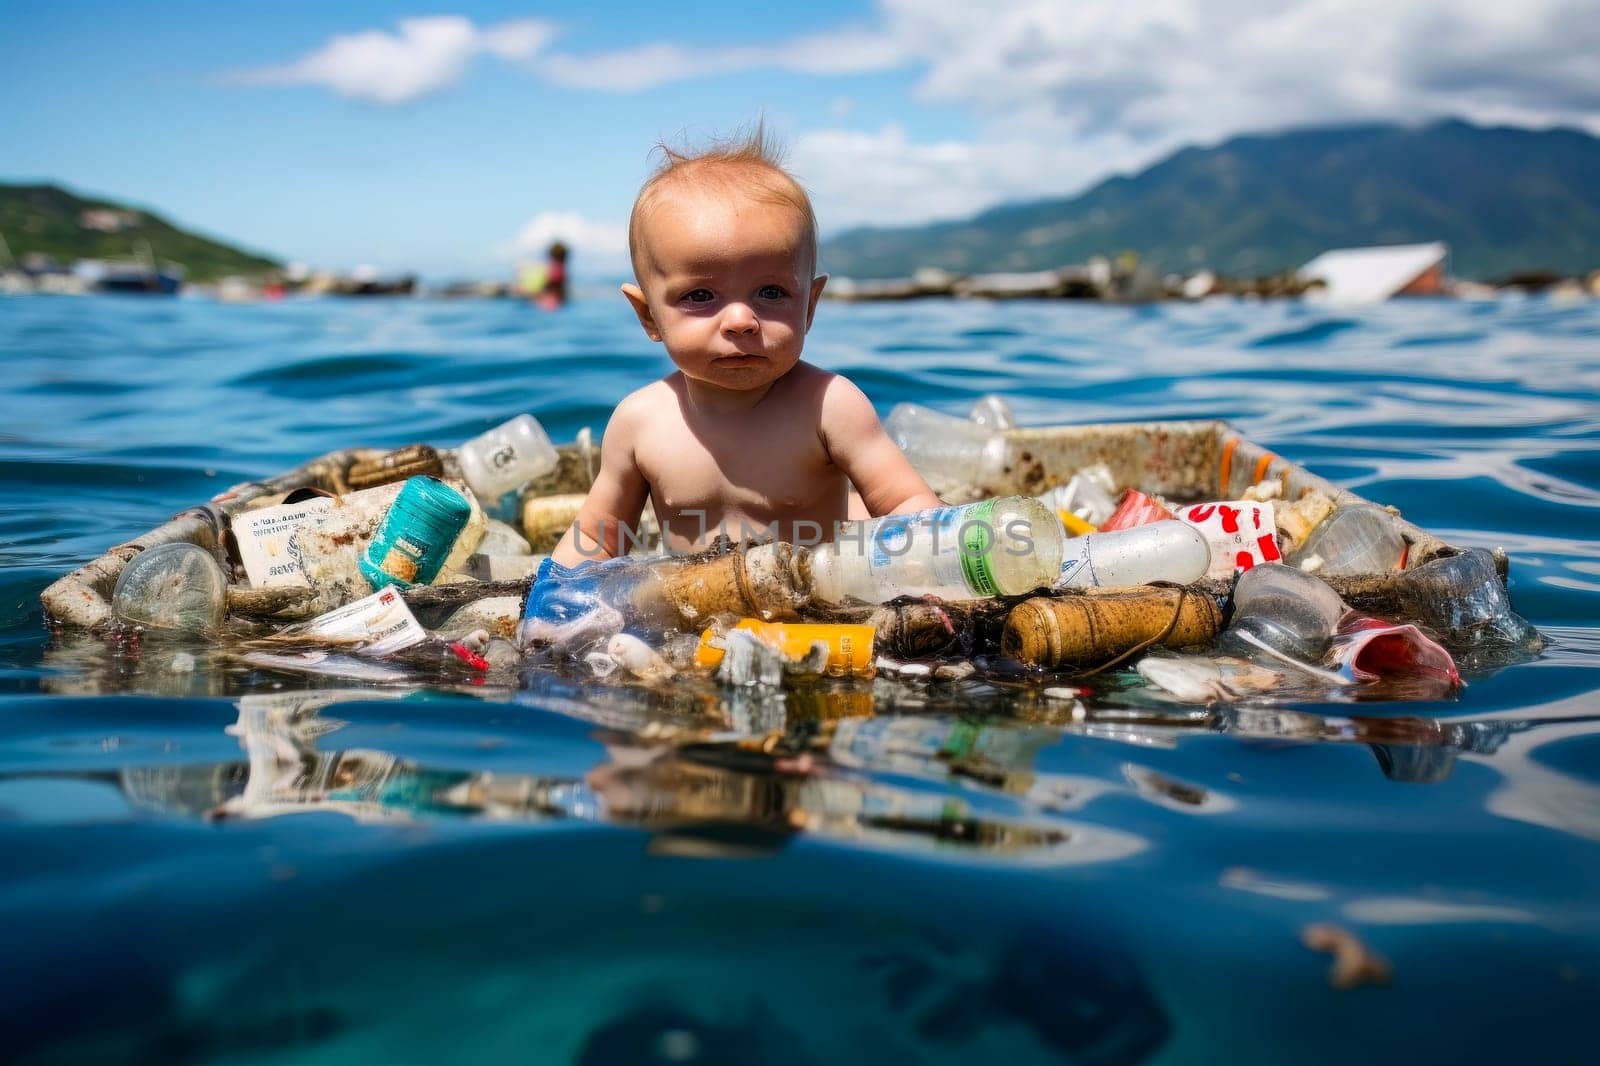 Child in Polluted Ocean Waters by pippocarlot